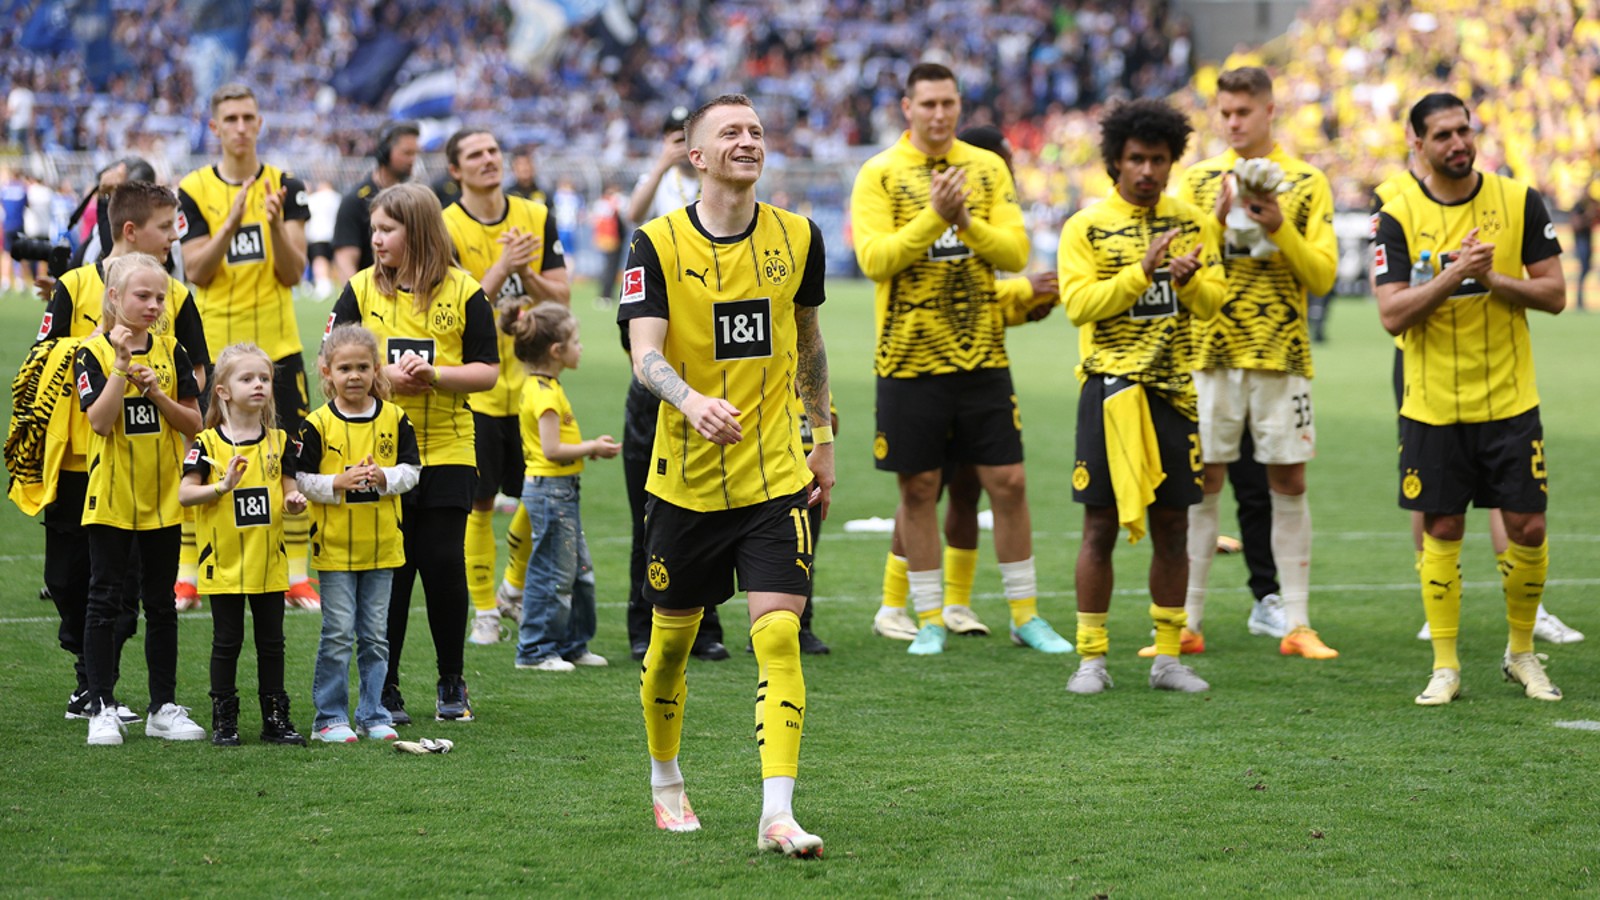 Will this be Marco Reus’ new membership?  The first official step has apparently been taken after saying goodbye to BVB